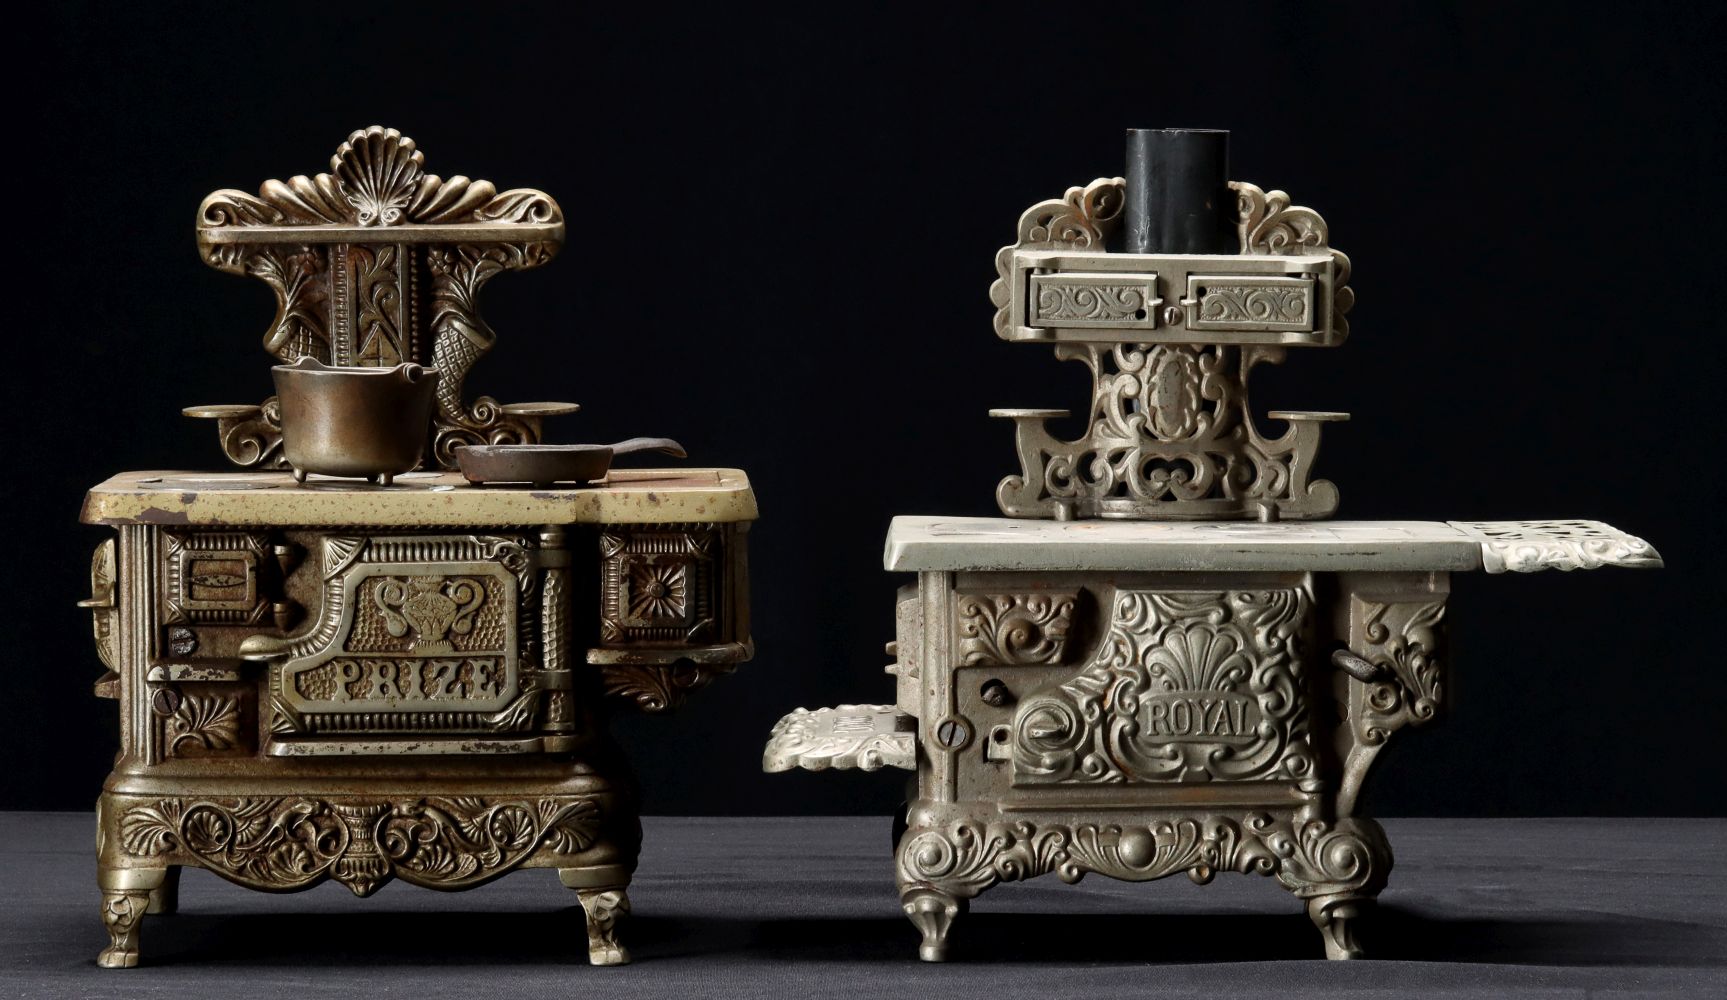 'PRIZE' AND 'ROYAL' ANTIQUE CAST IRON TOY STOVES